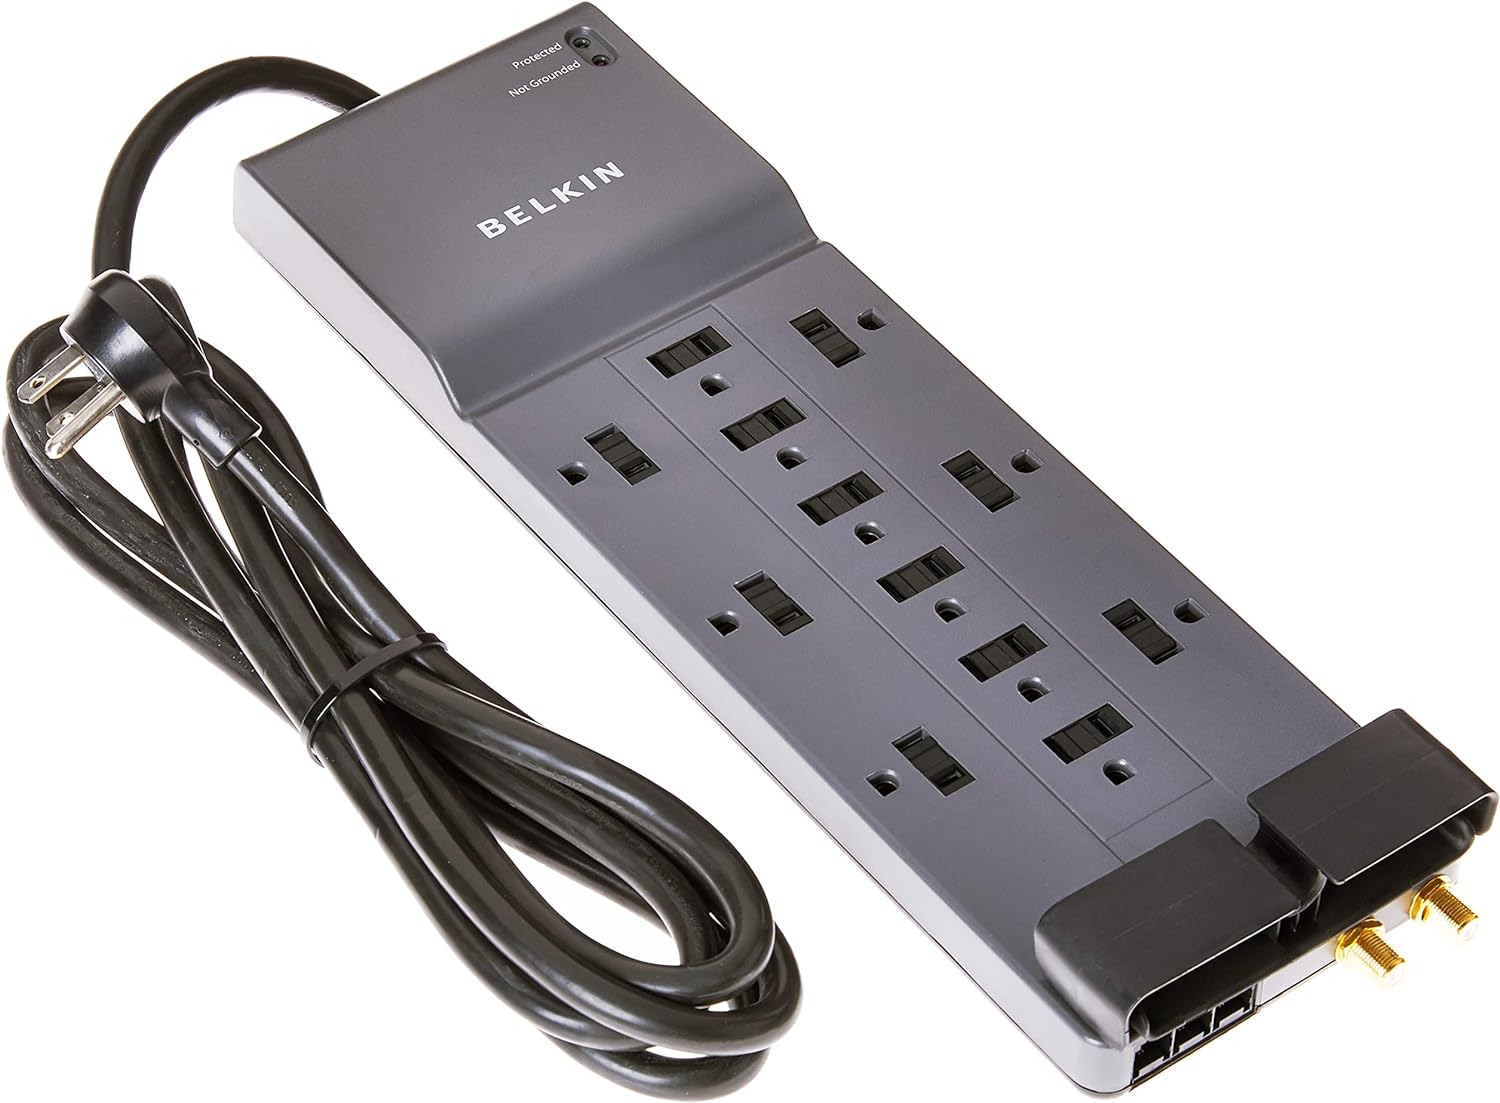 Belkin Power Strip Surge Protector - 12 AC Multiple Outlets & 8 ft Long Flat Plug Heavy Duty Extension Cord for Home, Office, Travel, Computer, Laptop & Phone Charging Brick (3,940 Joules), Pack of 3